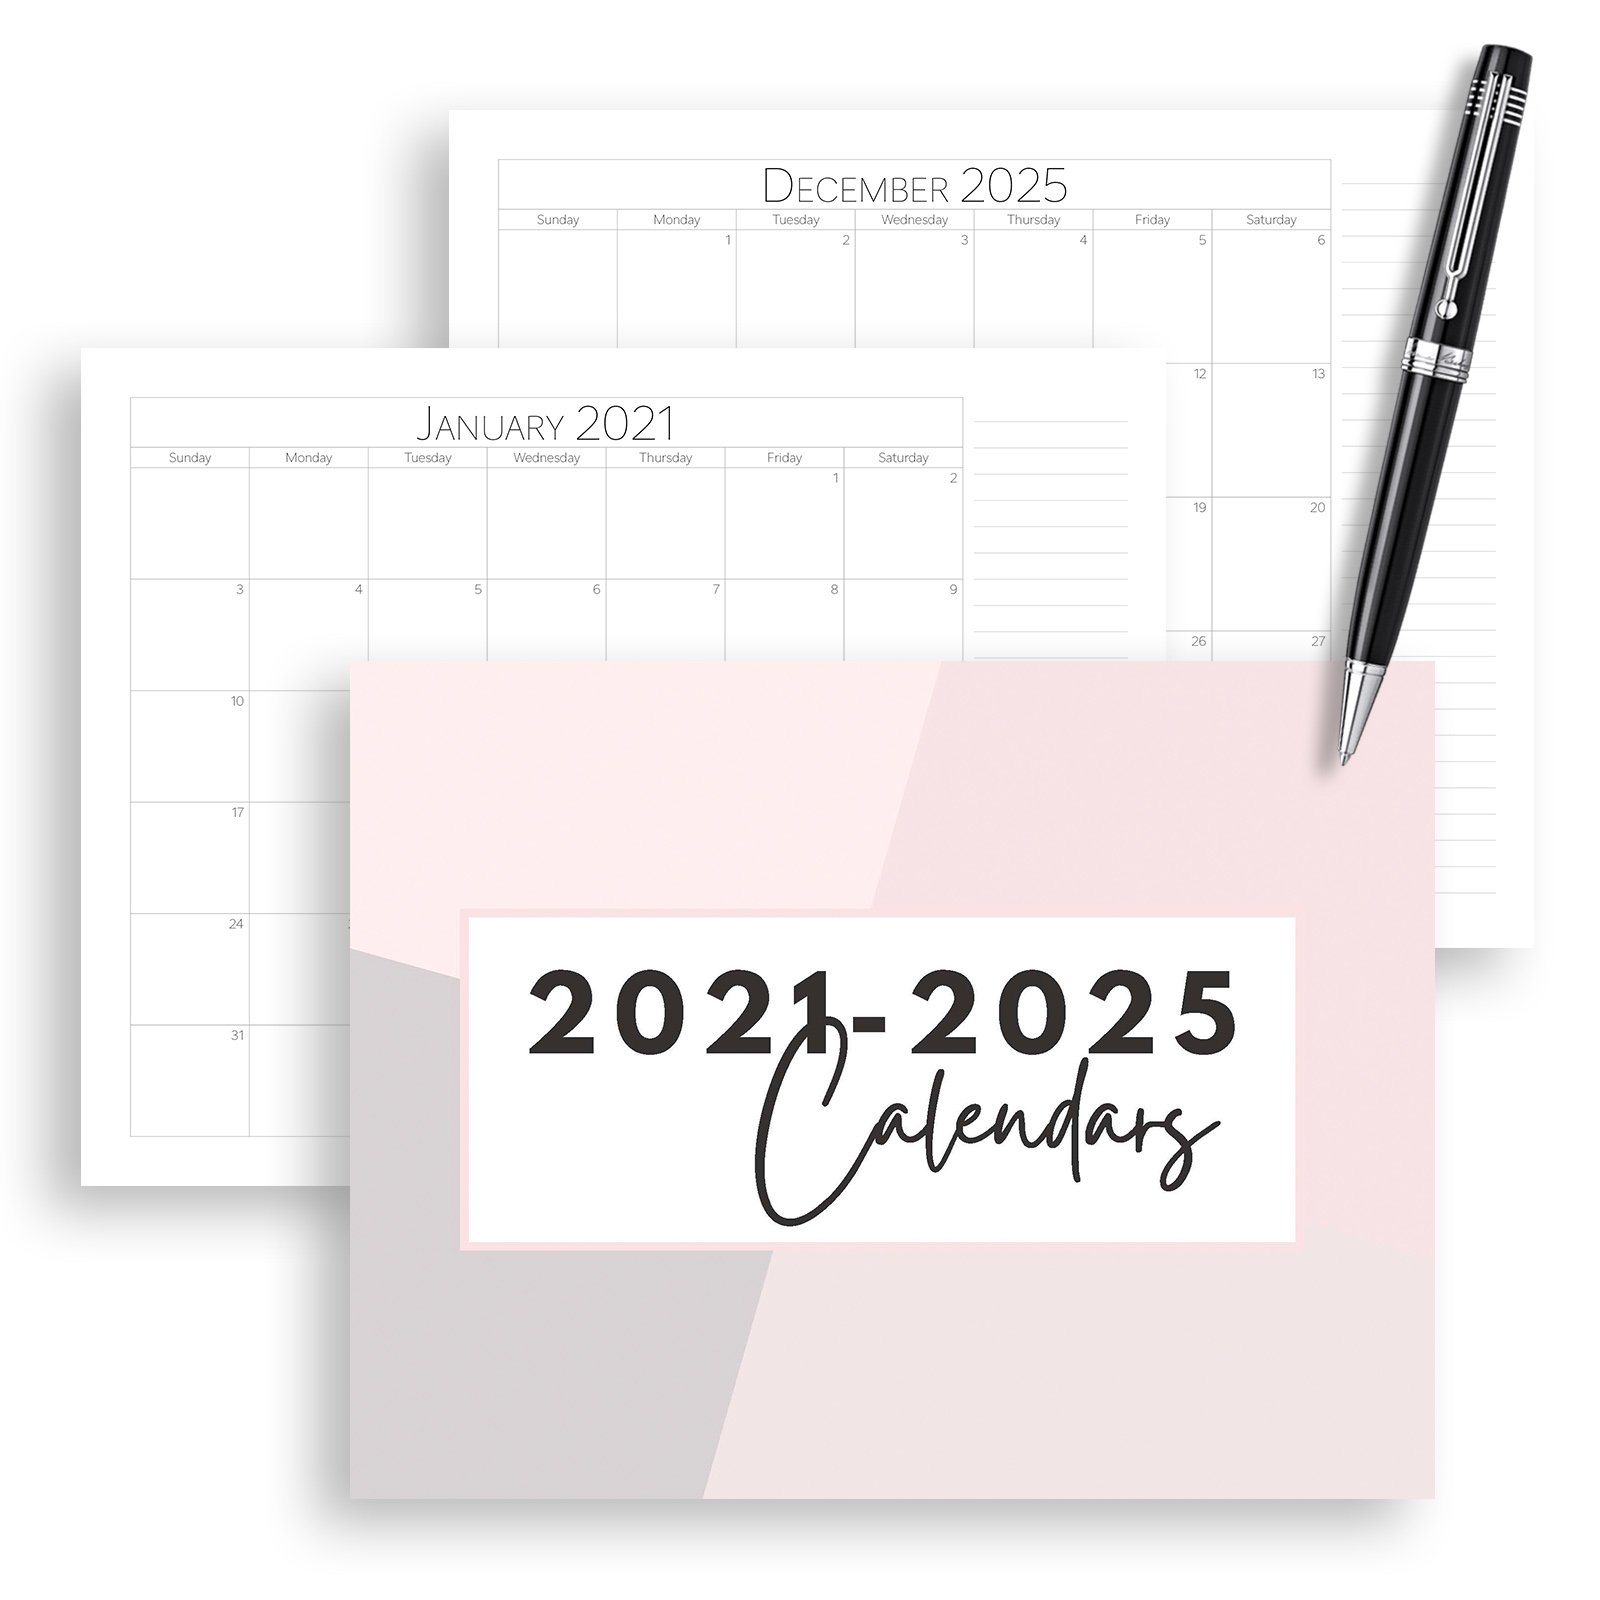 free 2021-2025 calendars now - Editable & Printable PDF - Get organized with these FREE 2021, 2022, 2023, 2024, 2025 calendars